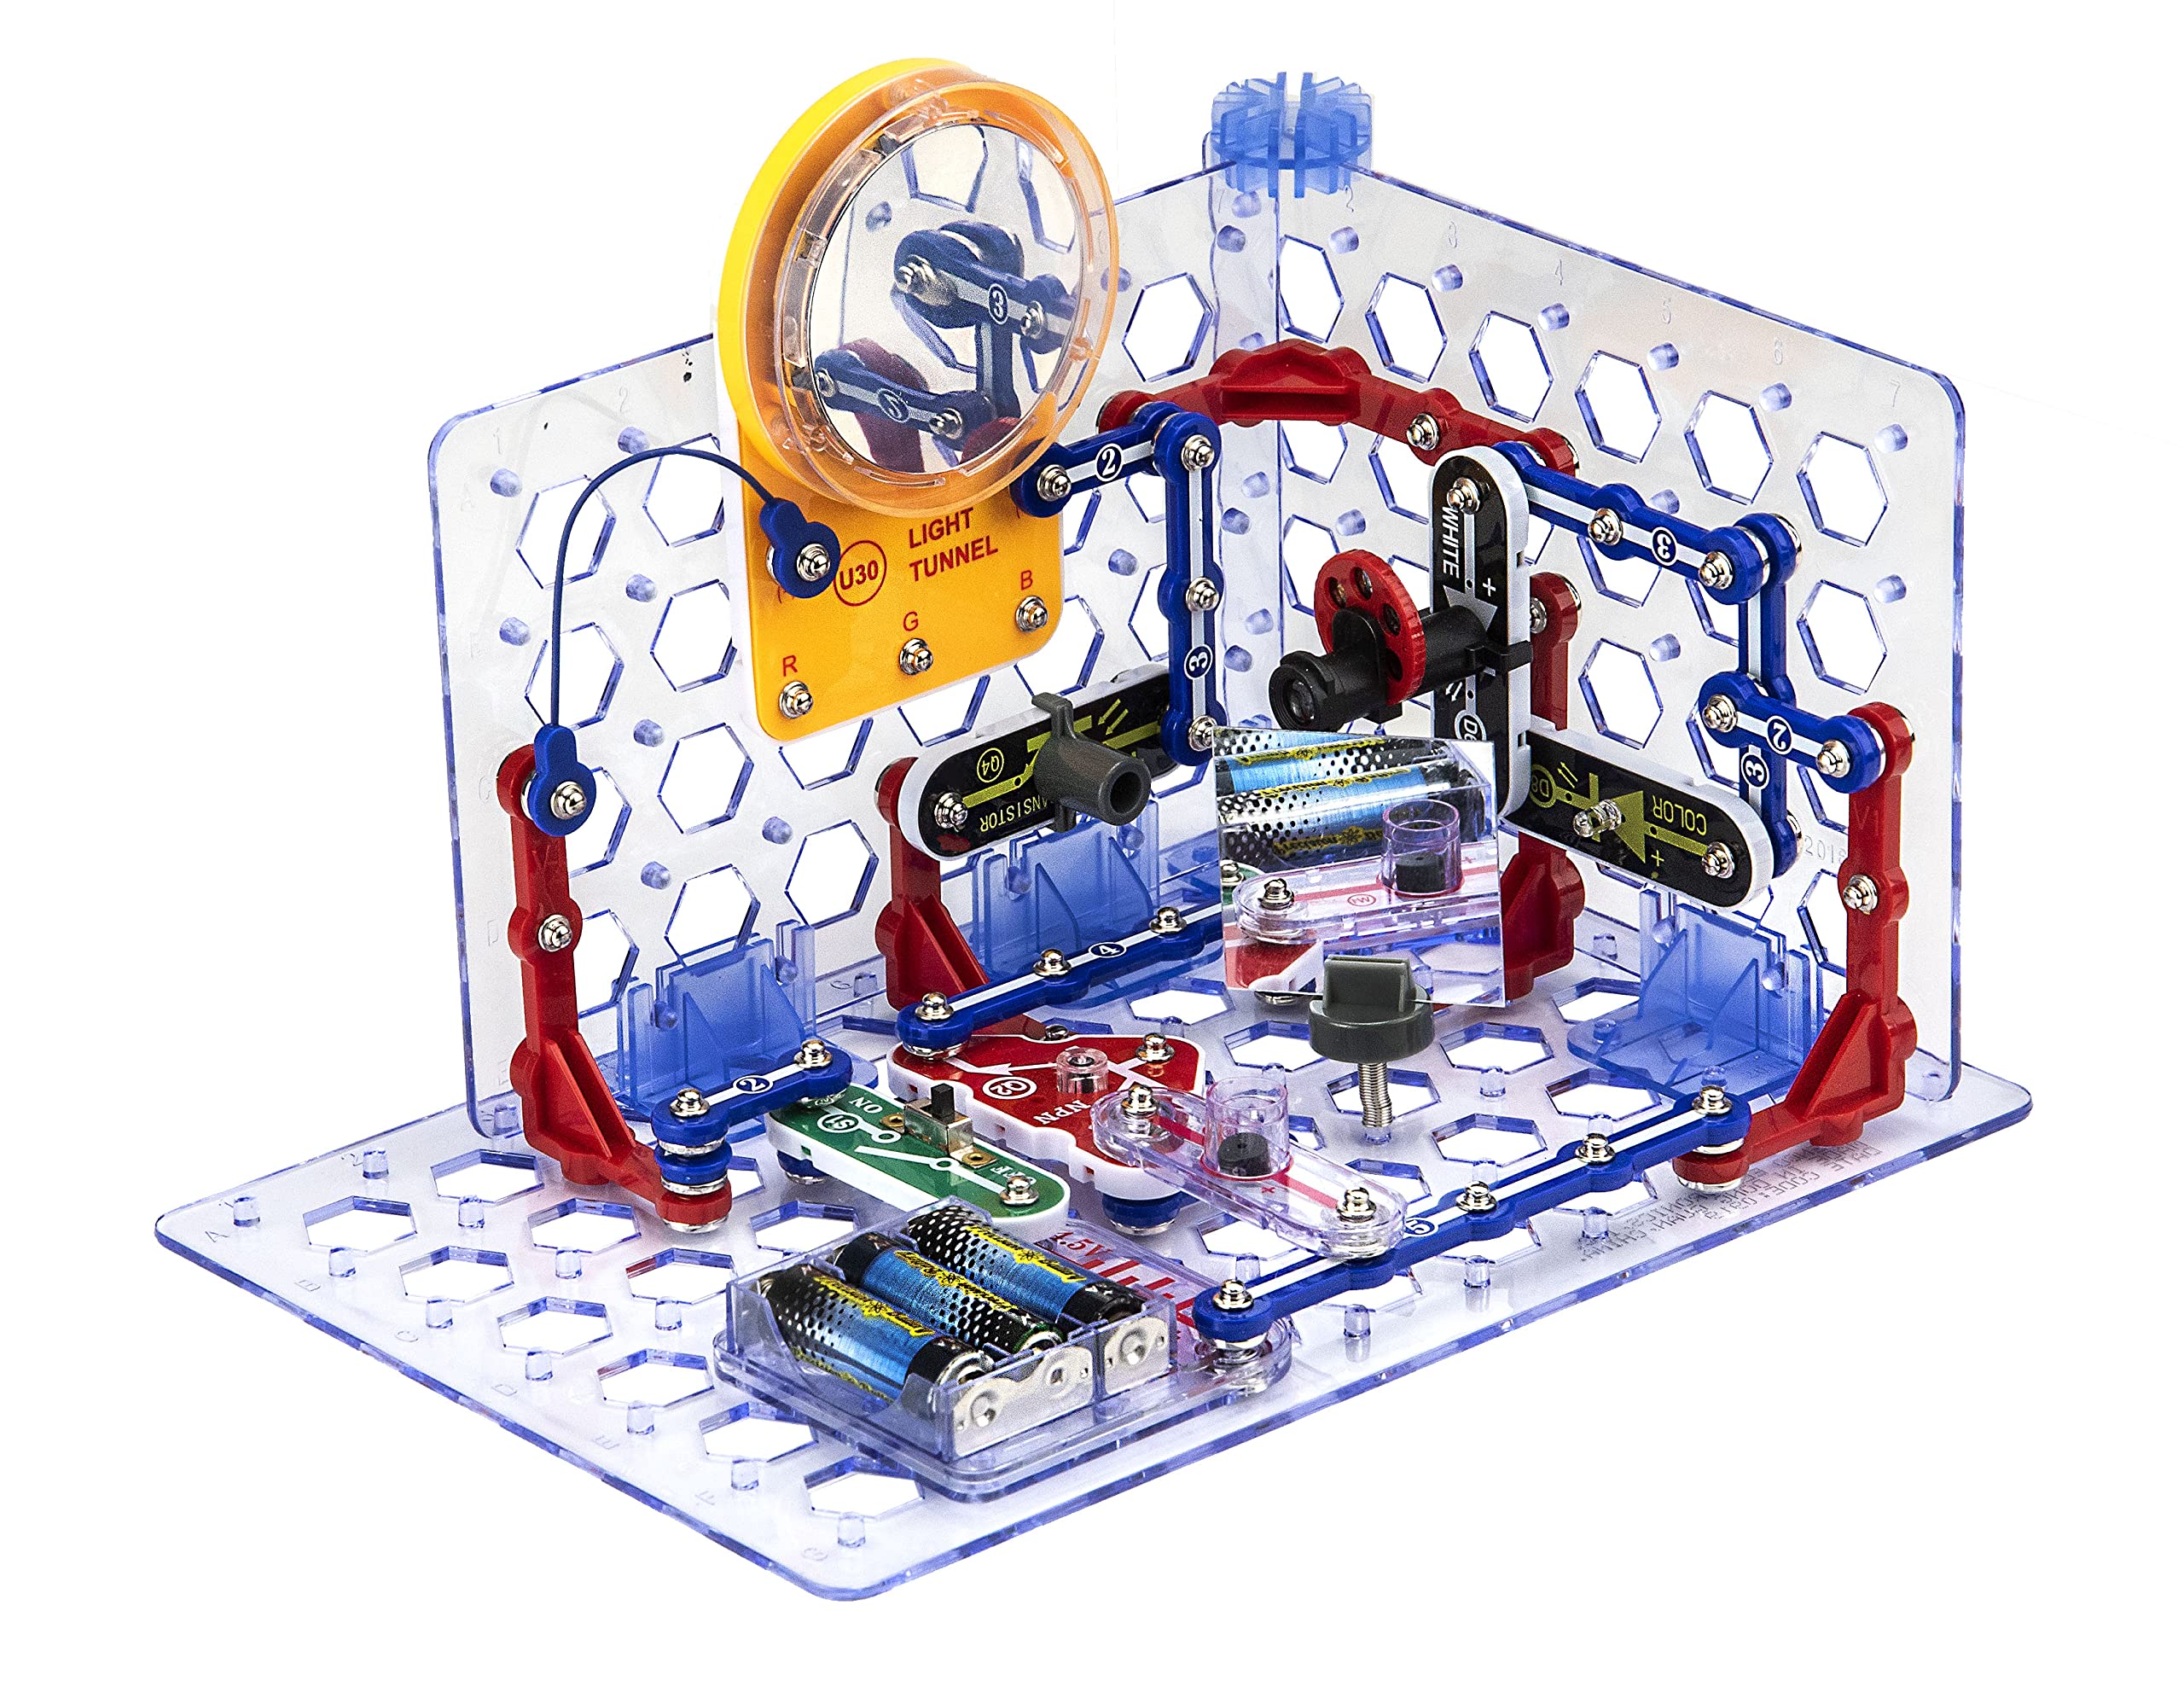 Snap Circuits “Arcade”, Electronics Exploration Kit, Stem Activities for  Ages 8+, Full Color Project Manual (SCA-200)